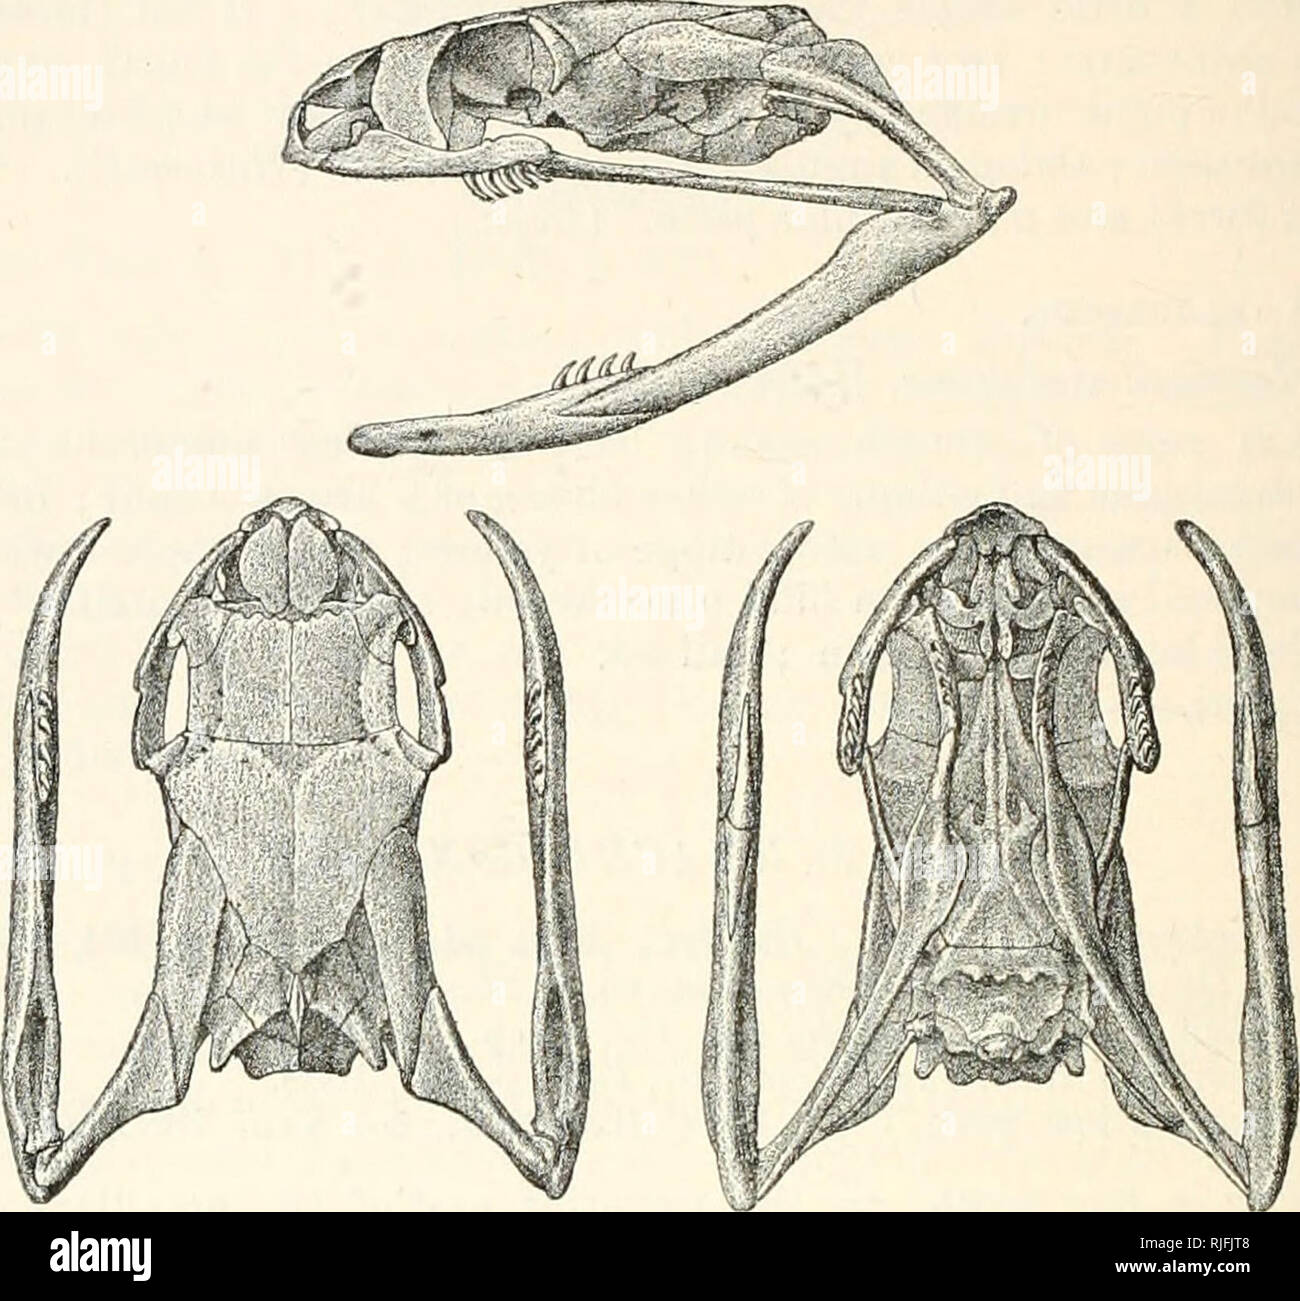 . Catalogue of the snakes in the ... Museum. 35-4 COLtTBEID^E. pits, in 23 to 27 rows; scales on three or four lateral rows oblique and with more or less distinctly serrated keels; ventrals rounded. Tail moderate ; subcaudals in two rows. Tropical and South Africa. Fiff. 25.. Skull of Dasypeltis scahra. 1. Dasypeltis scabra. Coluber scaber, Linn. Mus. Ad. Frid. p. 36, pi. x. fig. 1 (1754). and S. N. i. p. 384 (1766) ; Merr. Beitr. Nat. Amph. i. p. 34, pi. ix. (1790); Baud. Eept. vi. p. 263 (1803). palmarum, Leach, Tuckey^s Explor. R. Zaire, App. p. 408 (1818). Anodon typus, Smith, Zool. Jonrn. Stock Photo